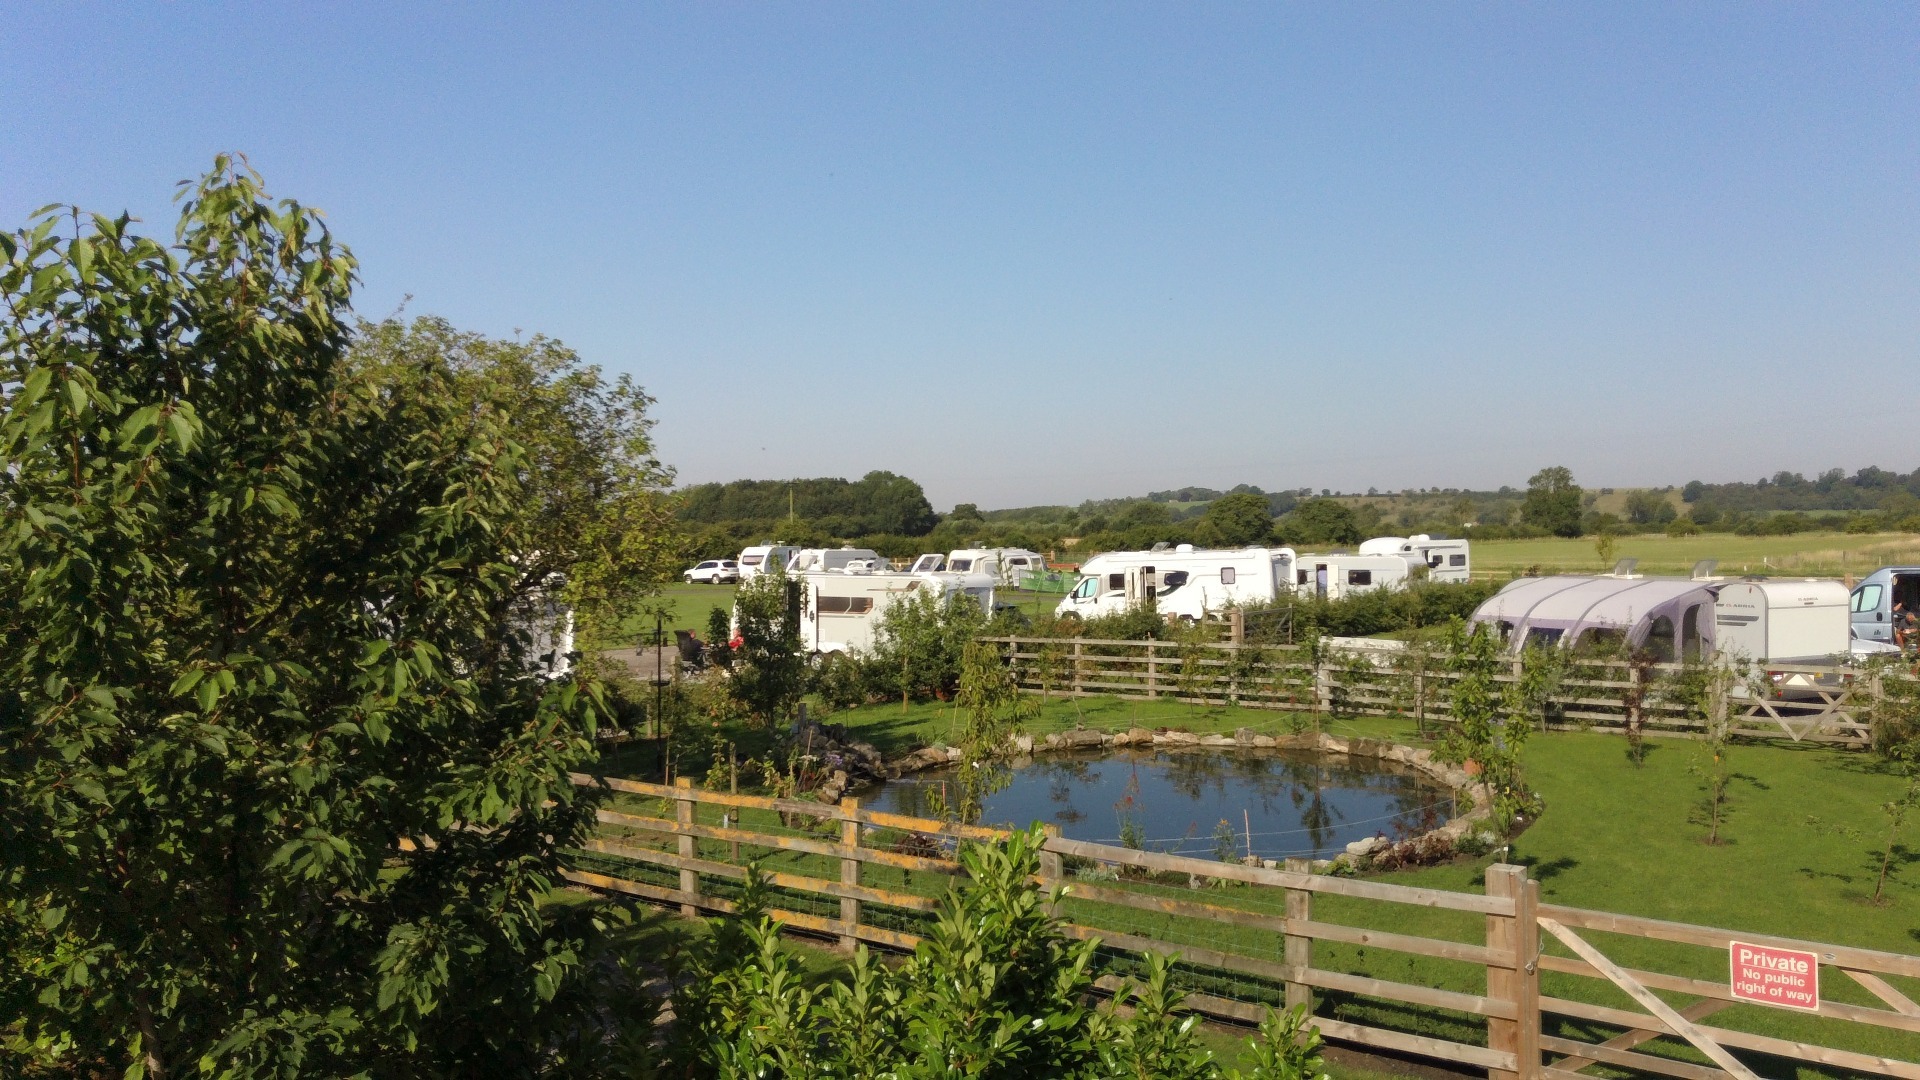 View of pond with caravan park in the background